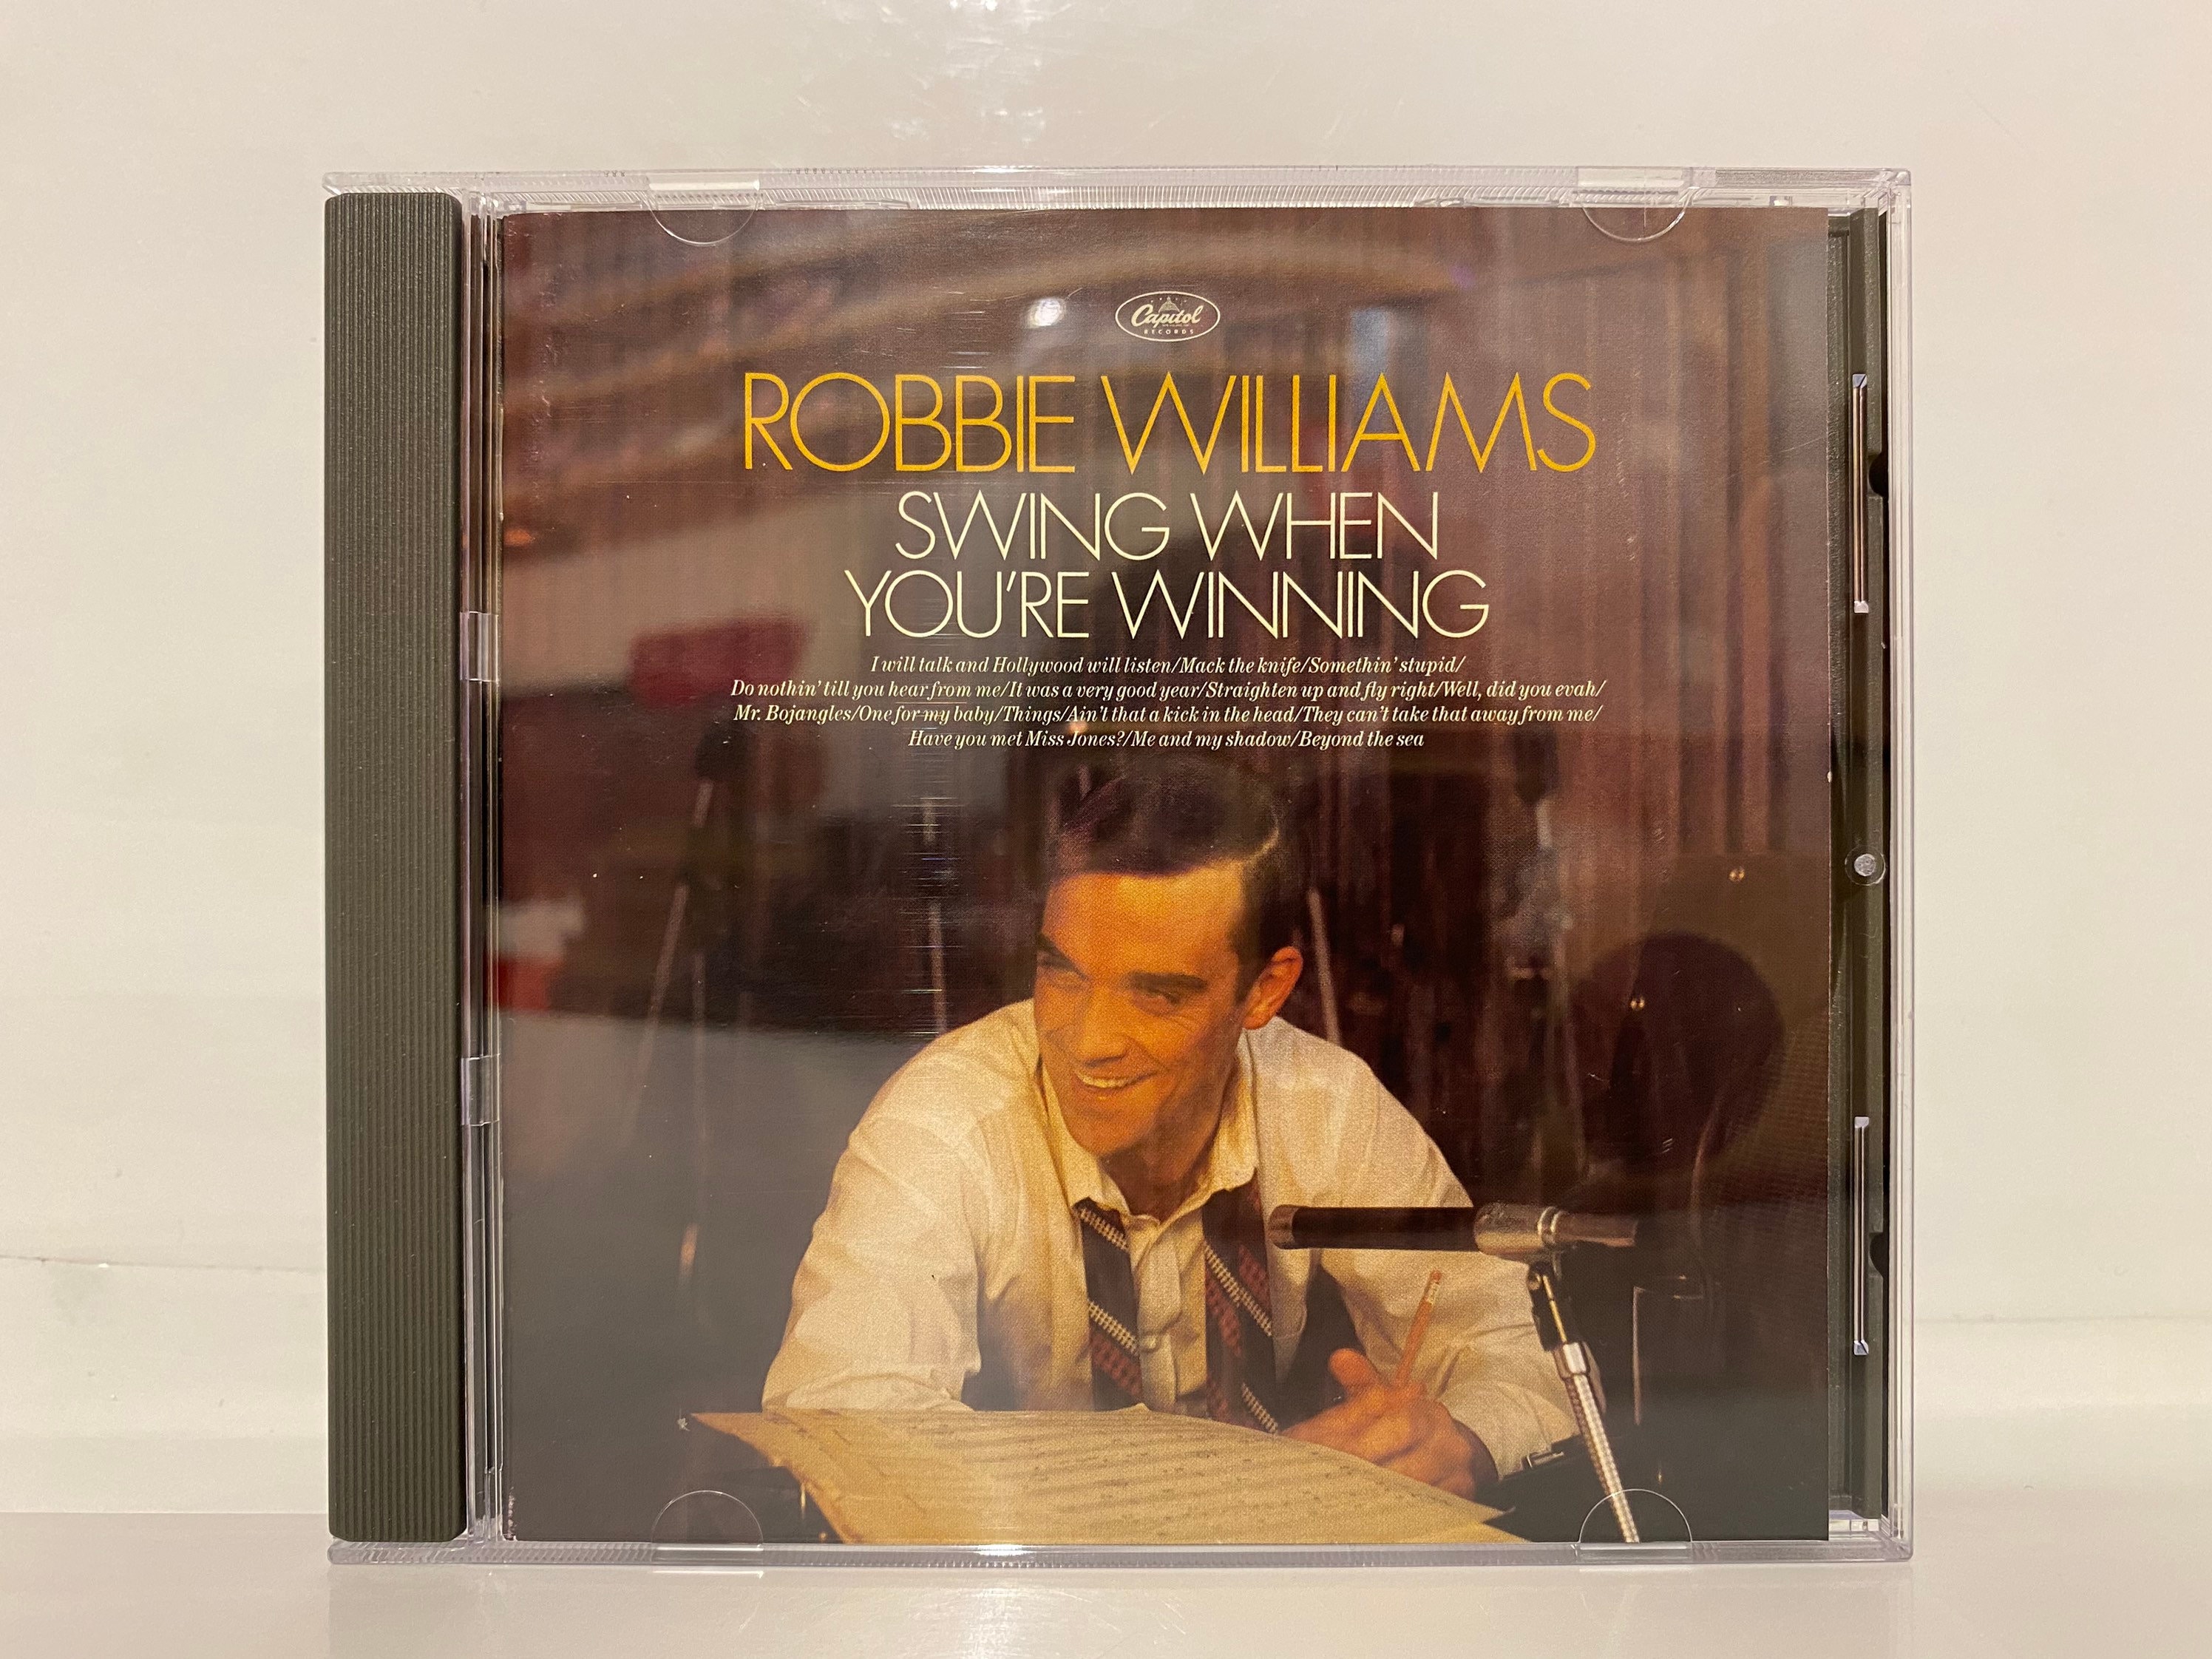 Robbie Williams CD Collection Album Swing When Youre Winning pic